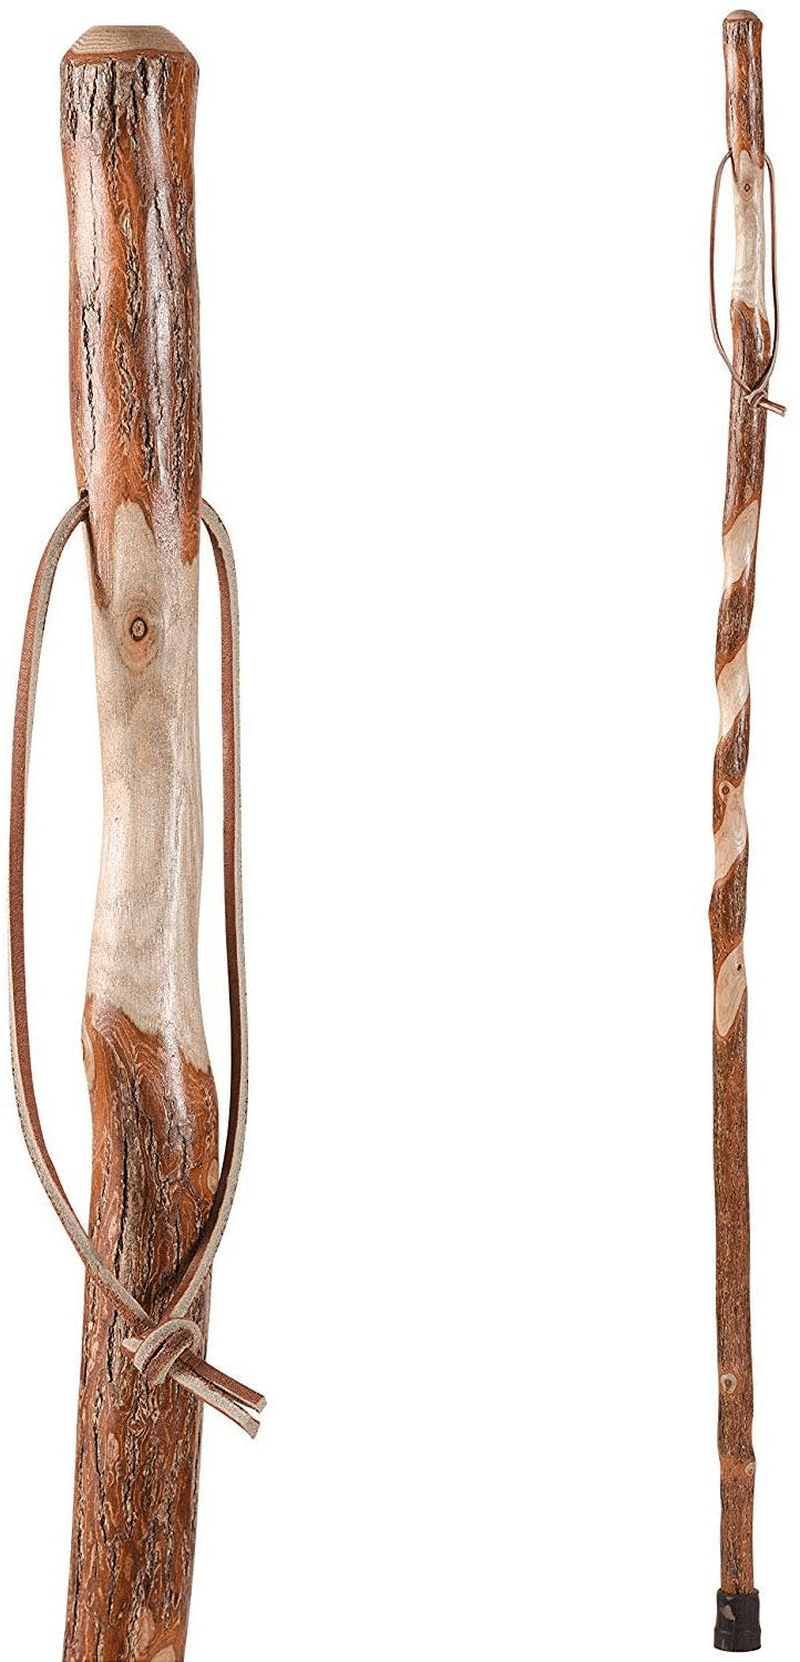 Brazos Twisted Sassafras Walking Stick, Handcrafted Wooden Staff, Hiking Stick for Men and Women, Trekking Pole, Wooden Walking Stick, Made in the USA, 55 Inches, Natural, (602-3000-1318)